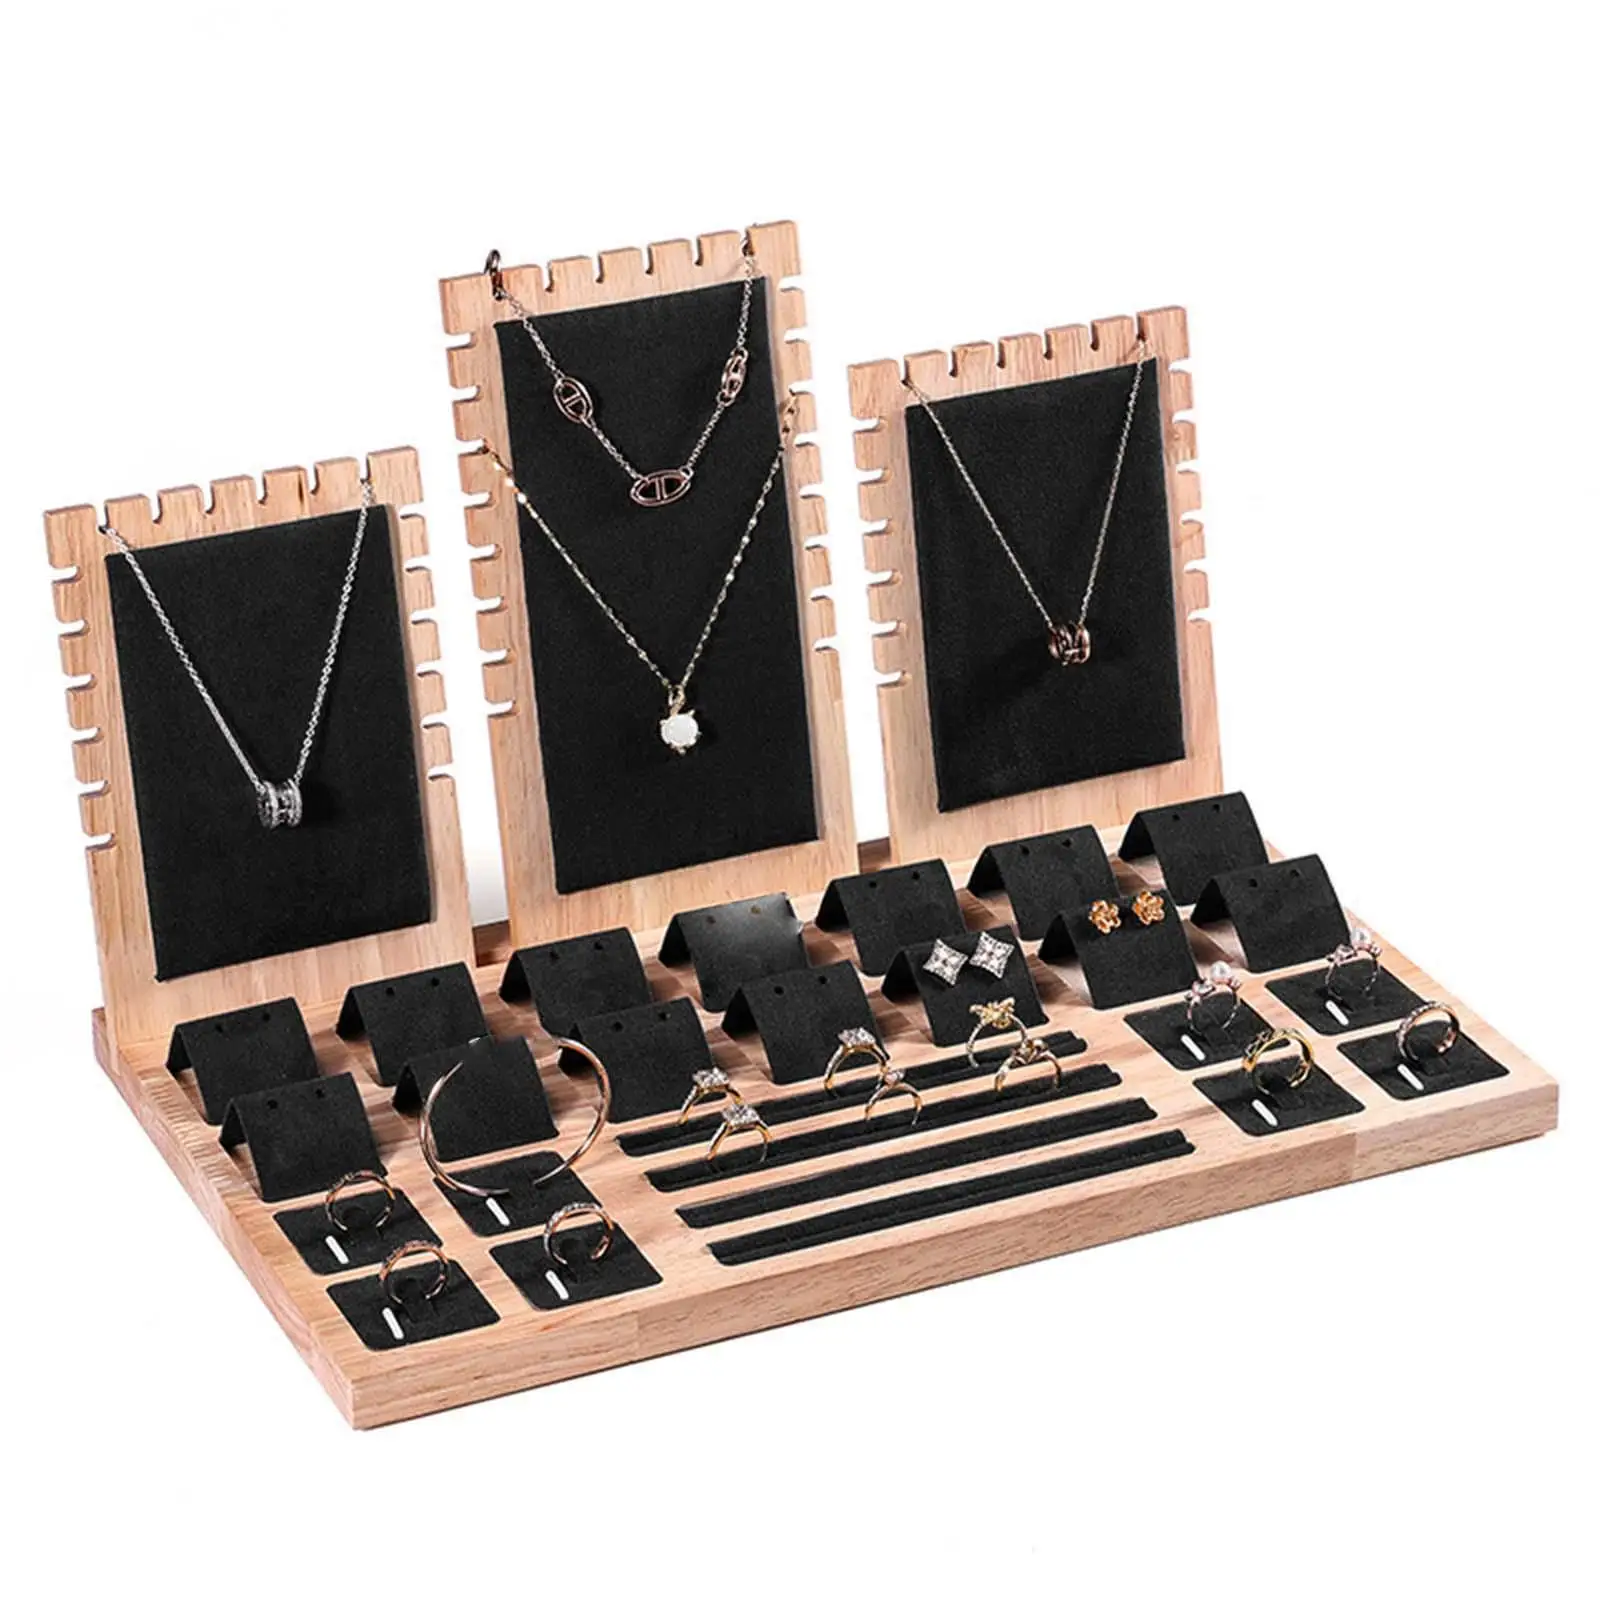 Jewelry Display Stand Multipurpose Holder Organizer Showcase Jewellery Display Stand for Bracelet Ear Studs Pendant Rings Shop